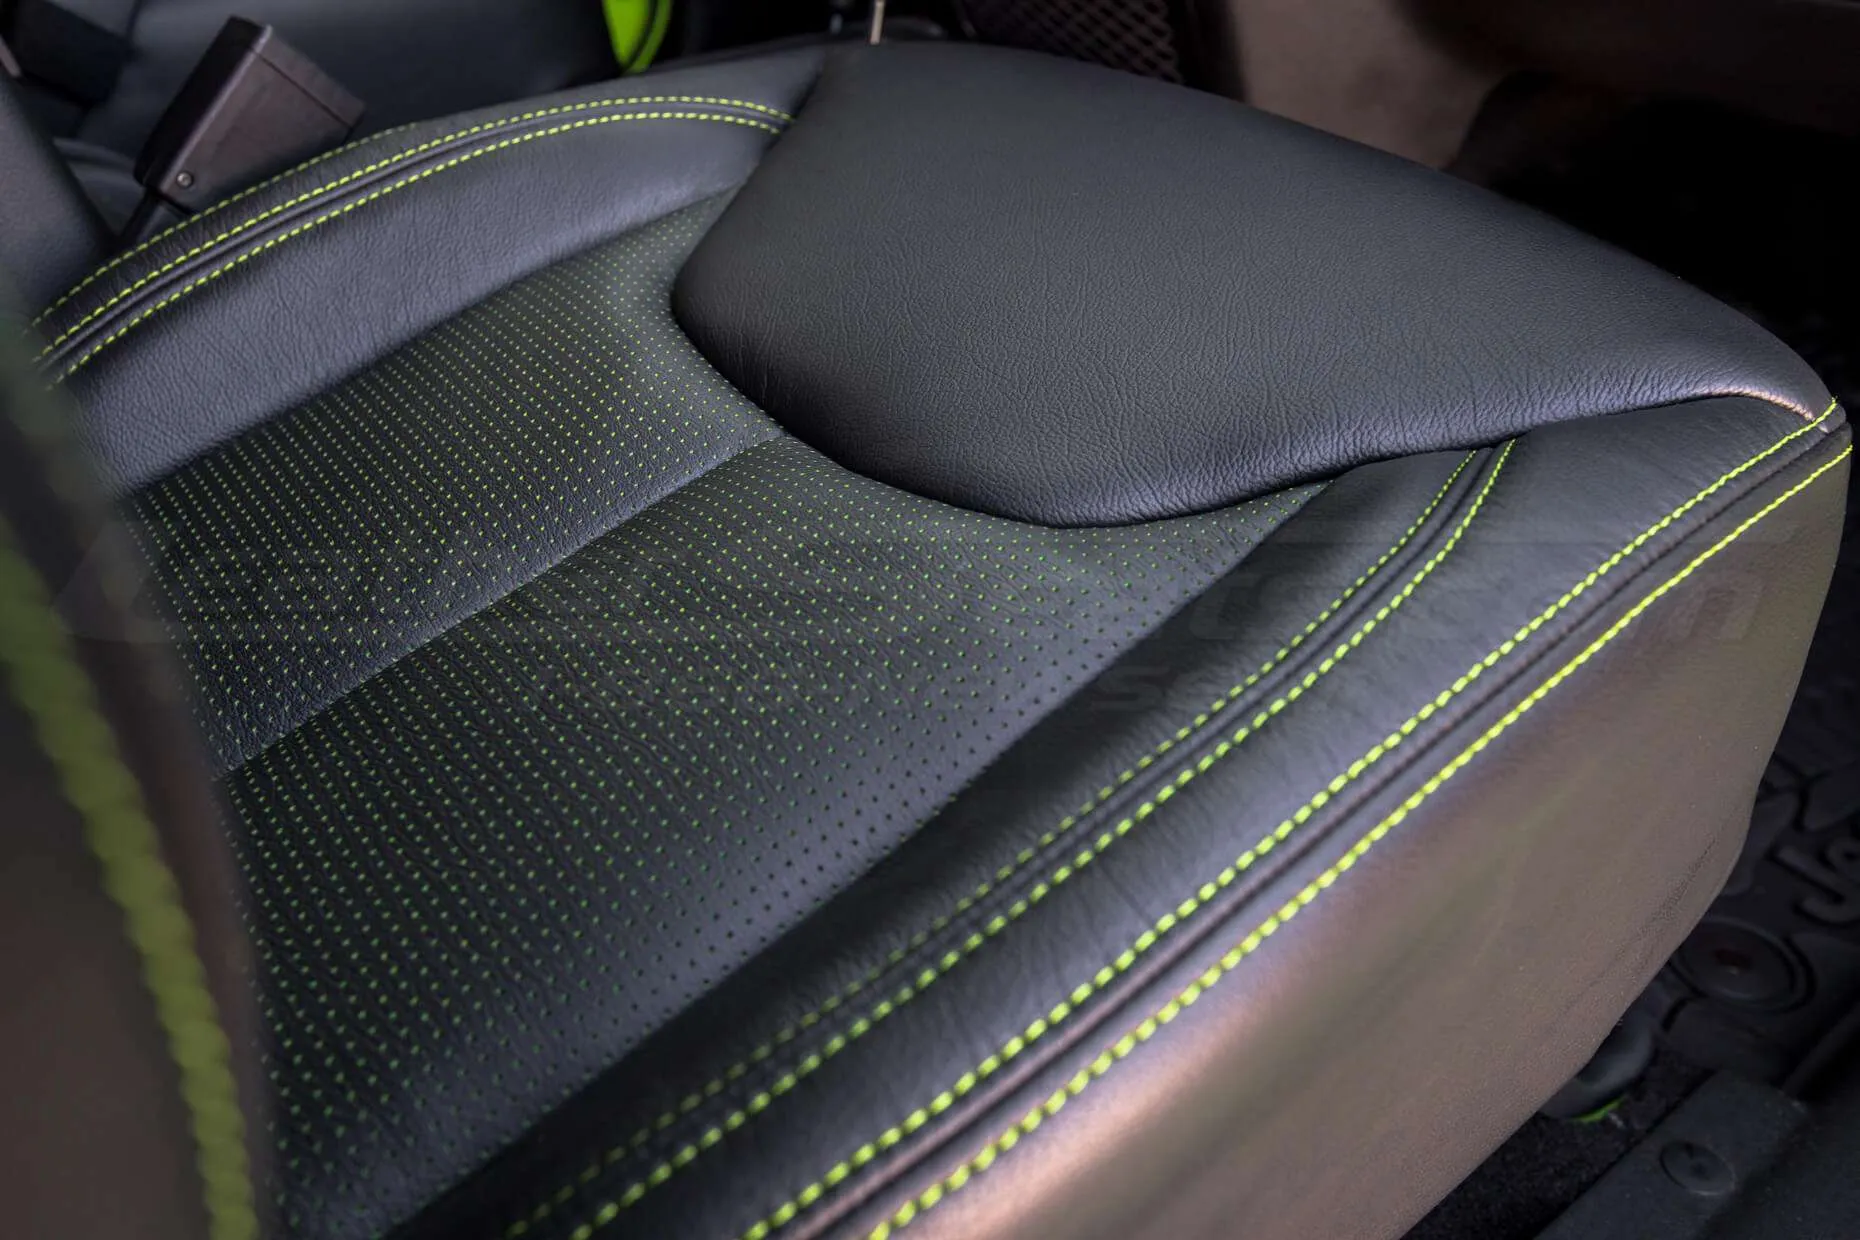 Jeep Wrangler Installed Leather Seats - Black & Piazza Green - Bottom seat cushion piazza perforation close-up